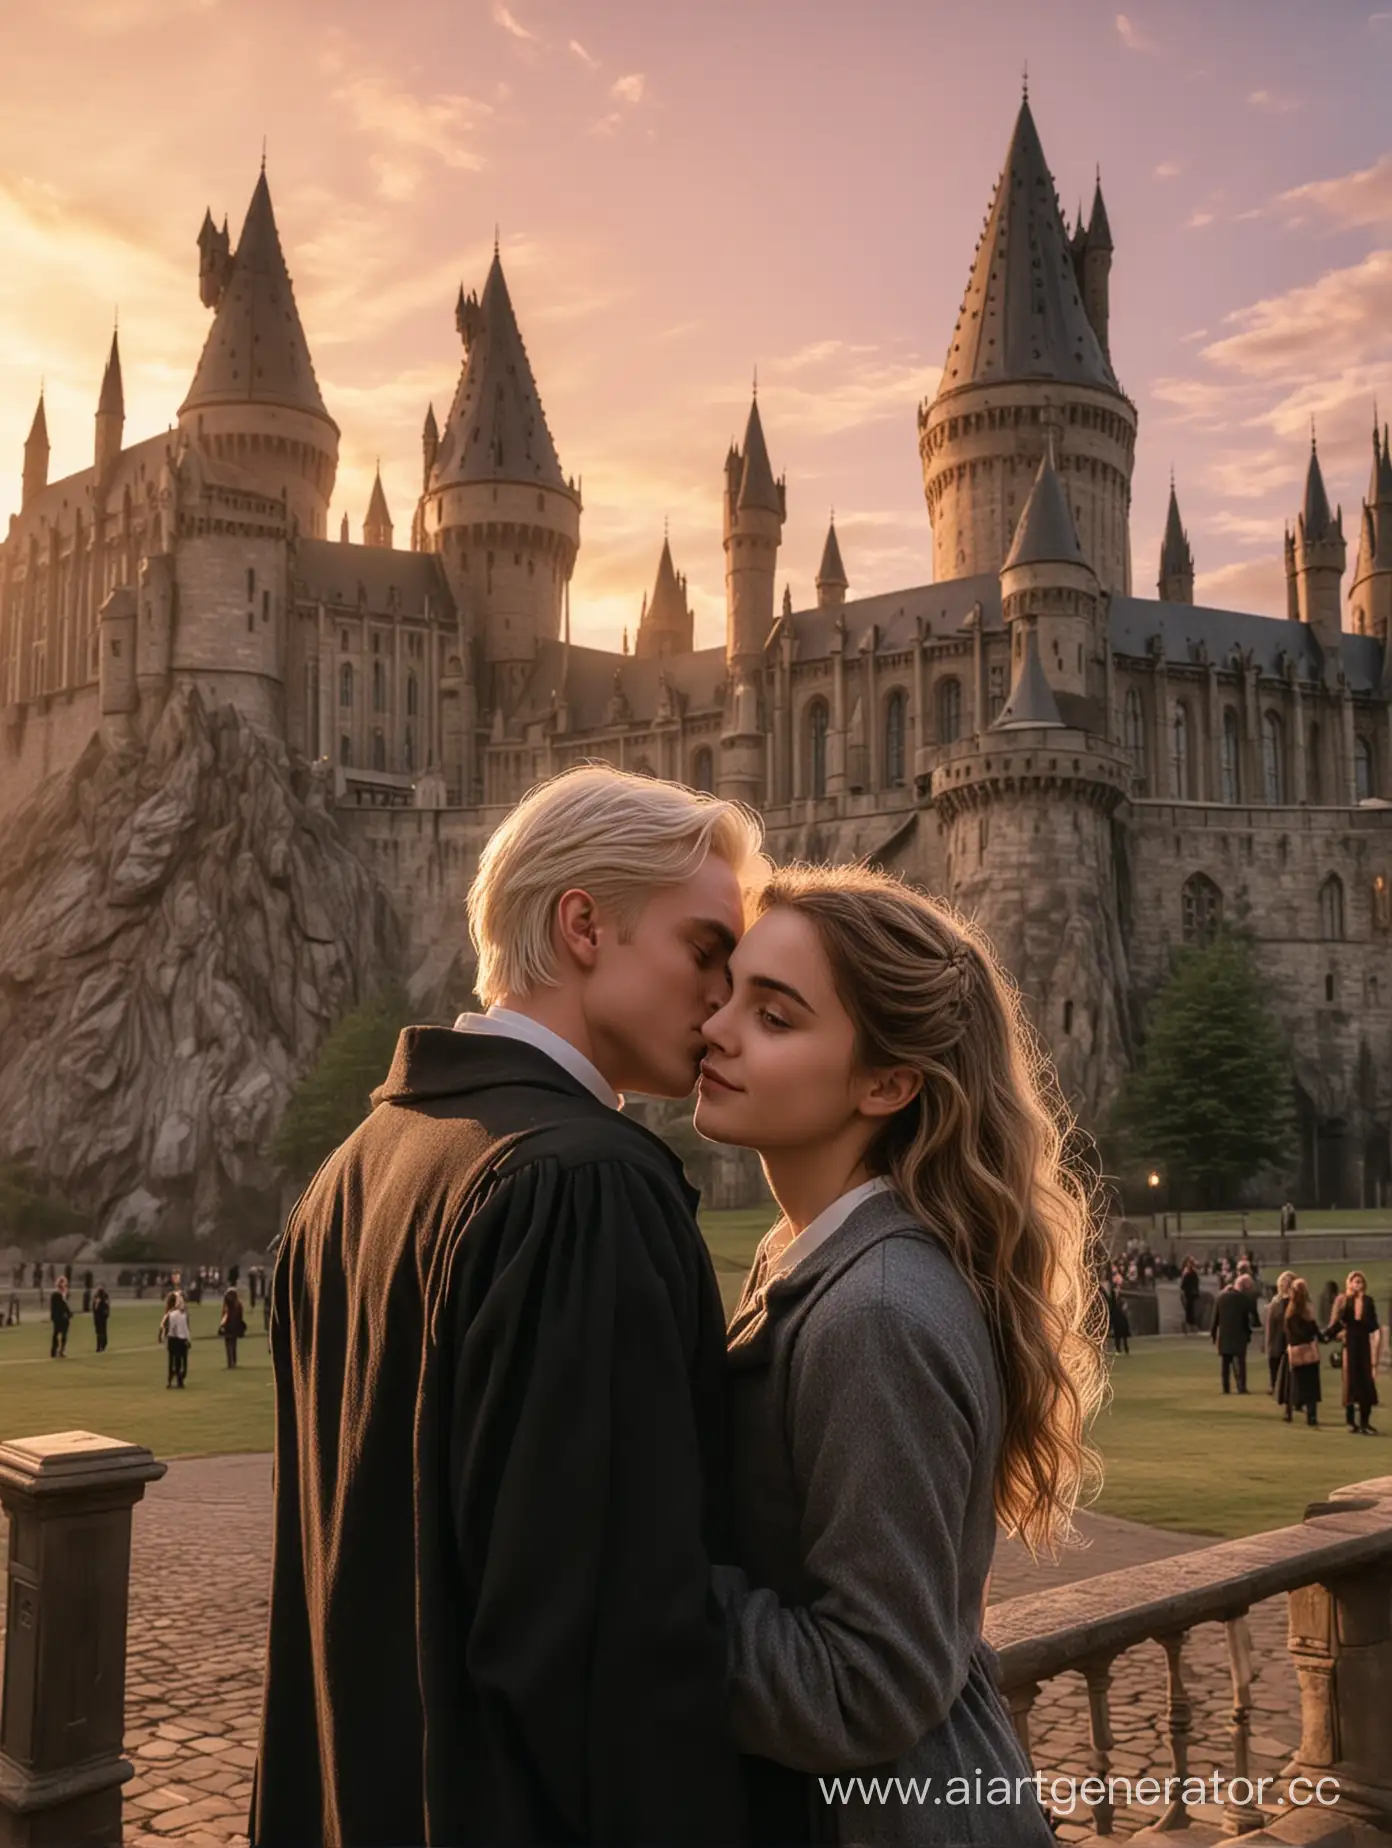 Hermione Granger with yellow eyes and Draco Malfoy with gray eyes are standing back to back, leaning their heads against the background of Hogwarts Castle, at sunset